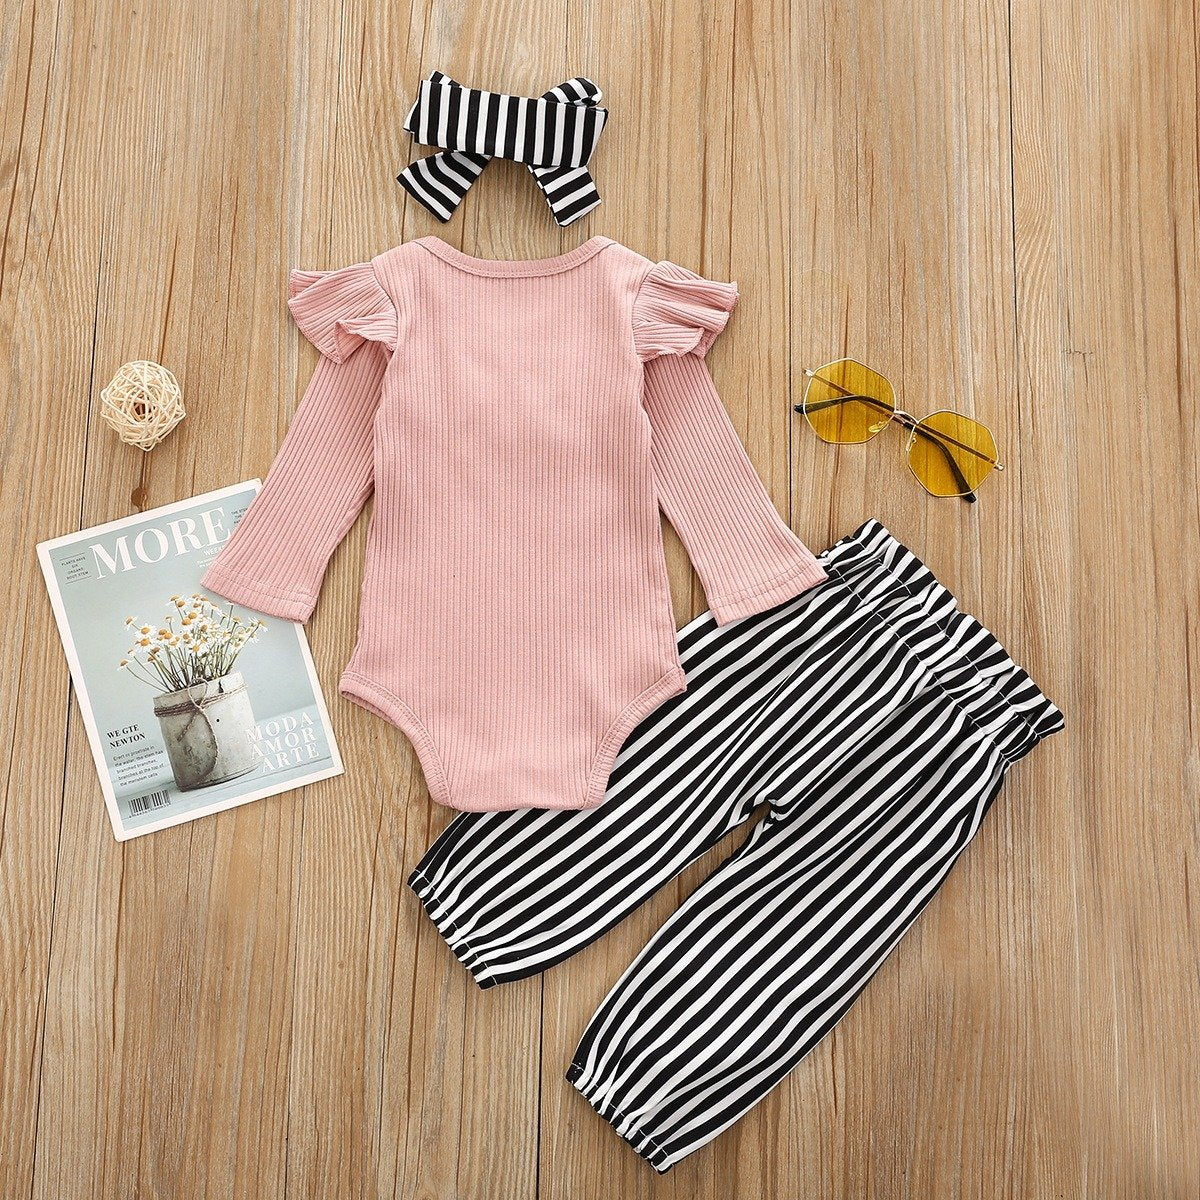 Baby Girl Soild Printed Fly Sleeve Romper With Stripe Pants Baby Set